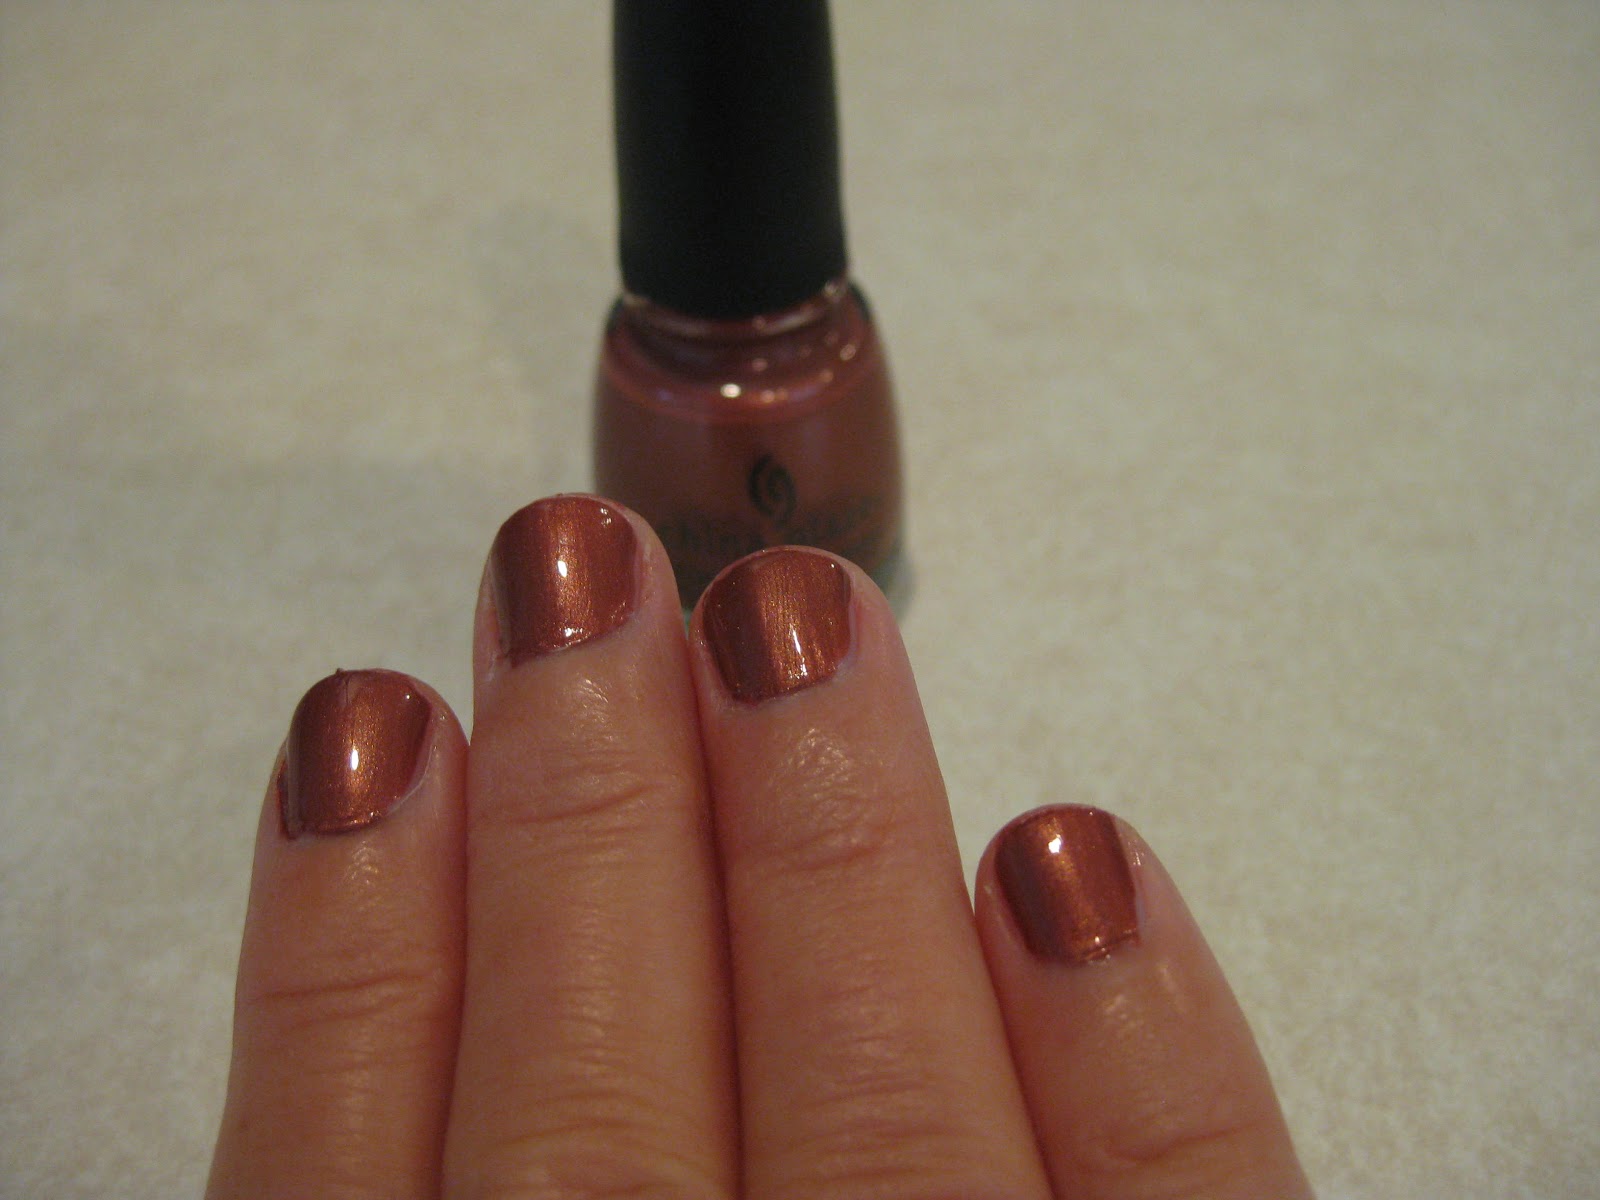 4. China Glaze Nail Lacquer in "That's Shore Bright" - wide 7